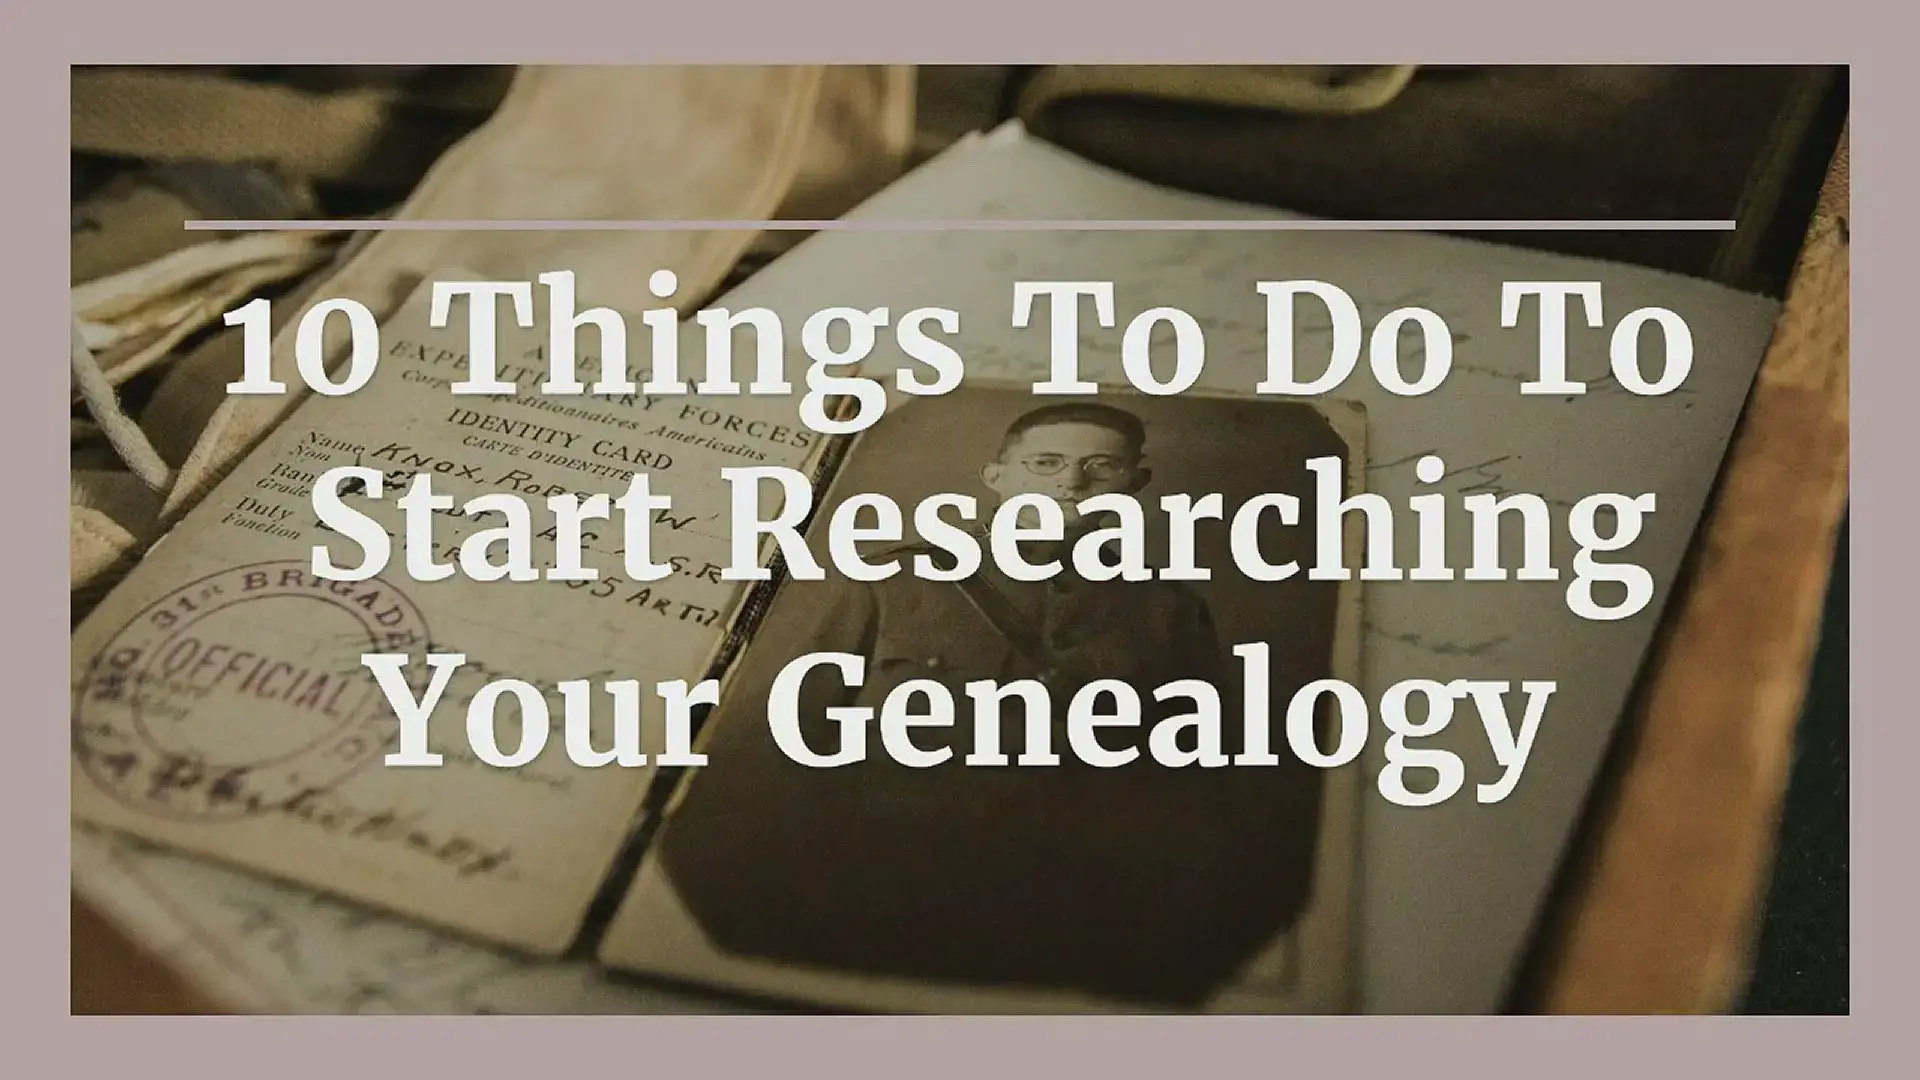 'Video thumbnail for 10 Things To Do To Start Researching Your Genealogy'